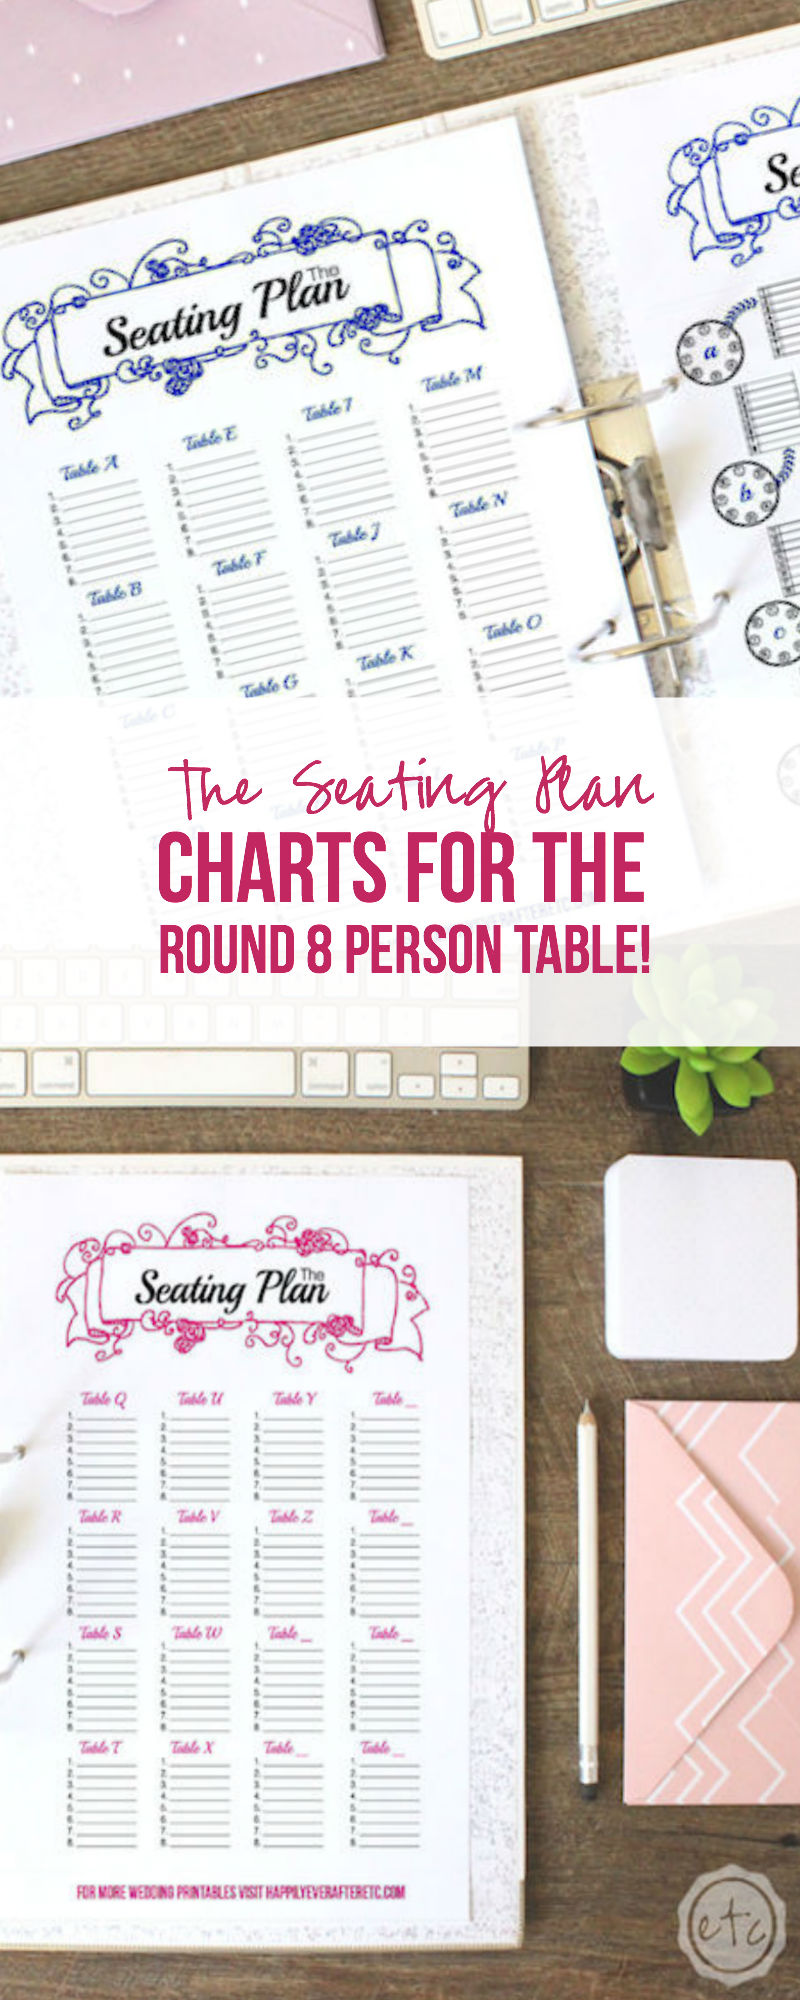 The Seating Plan: Charts for the Round Eight Person Table!